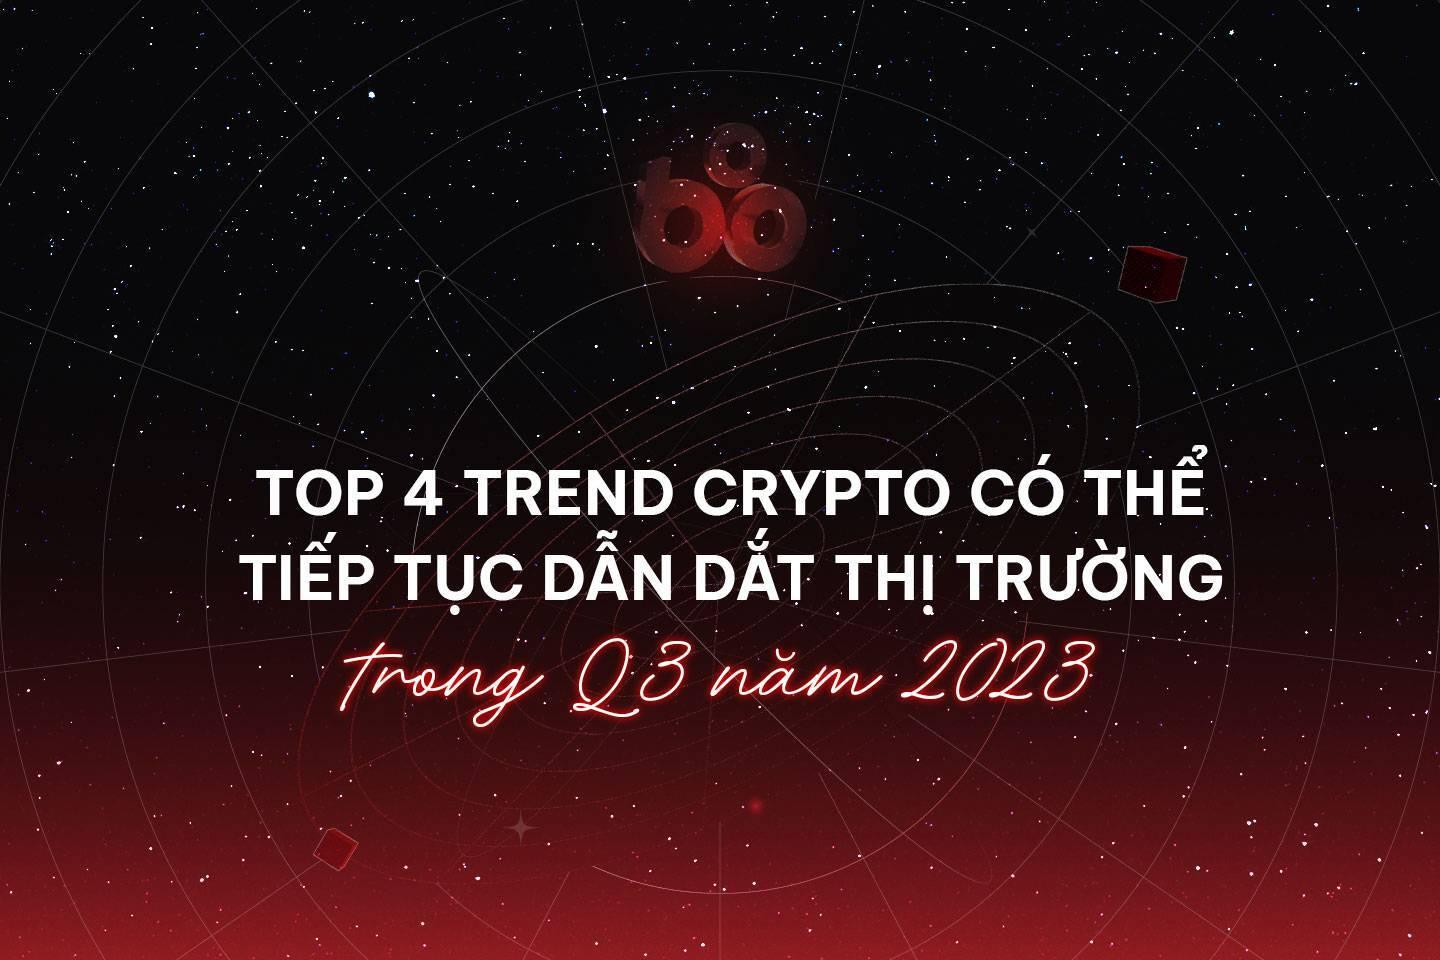 top-4-trend-crypto-co-the-tiep-tuc-dan-dat-thi-truong-trong-q3-nam-2023